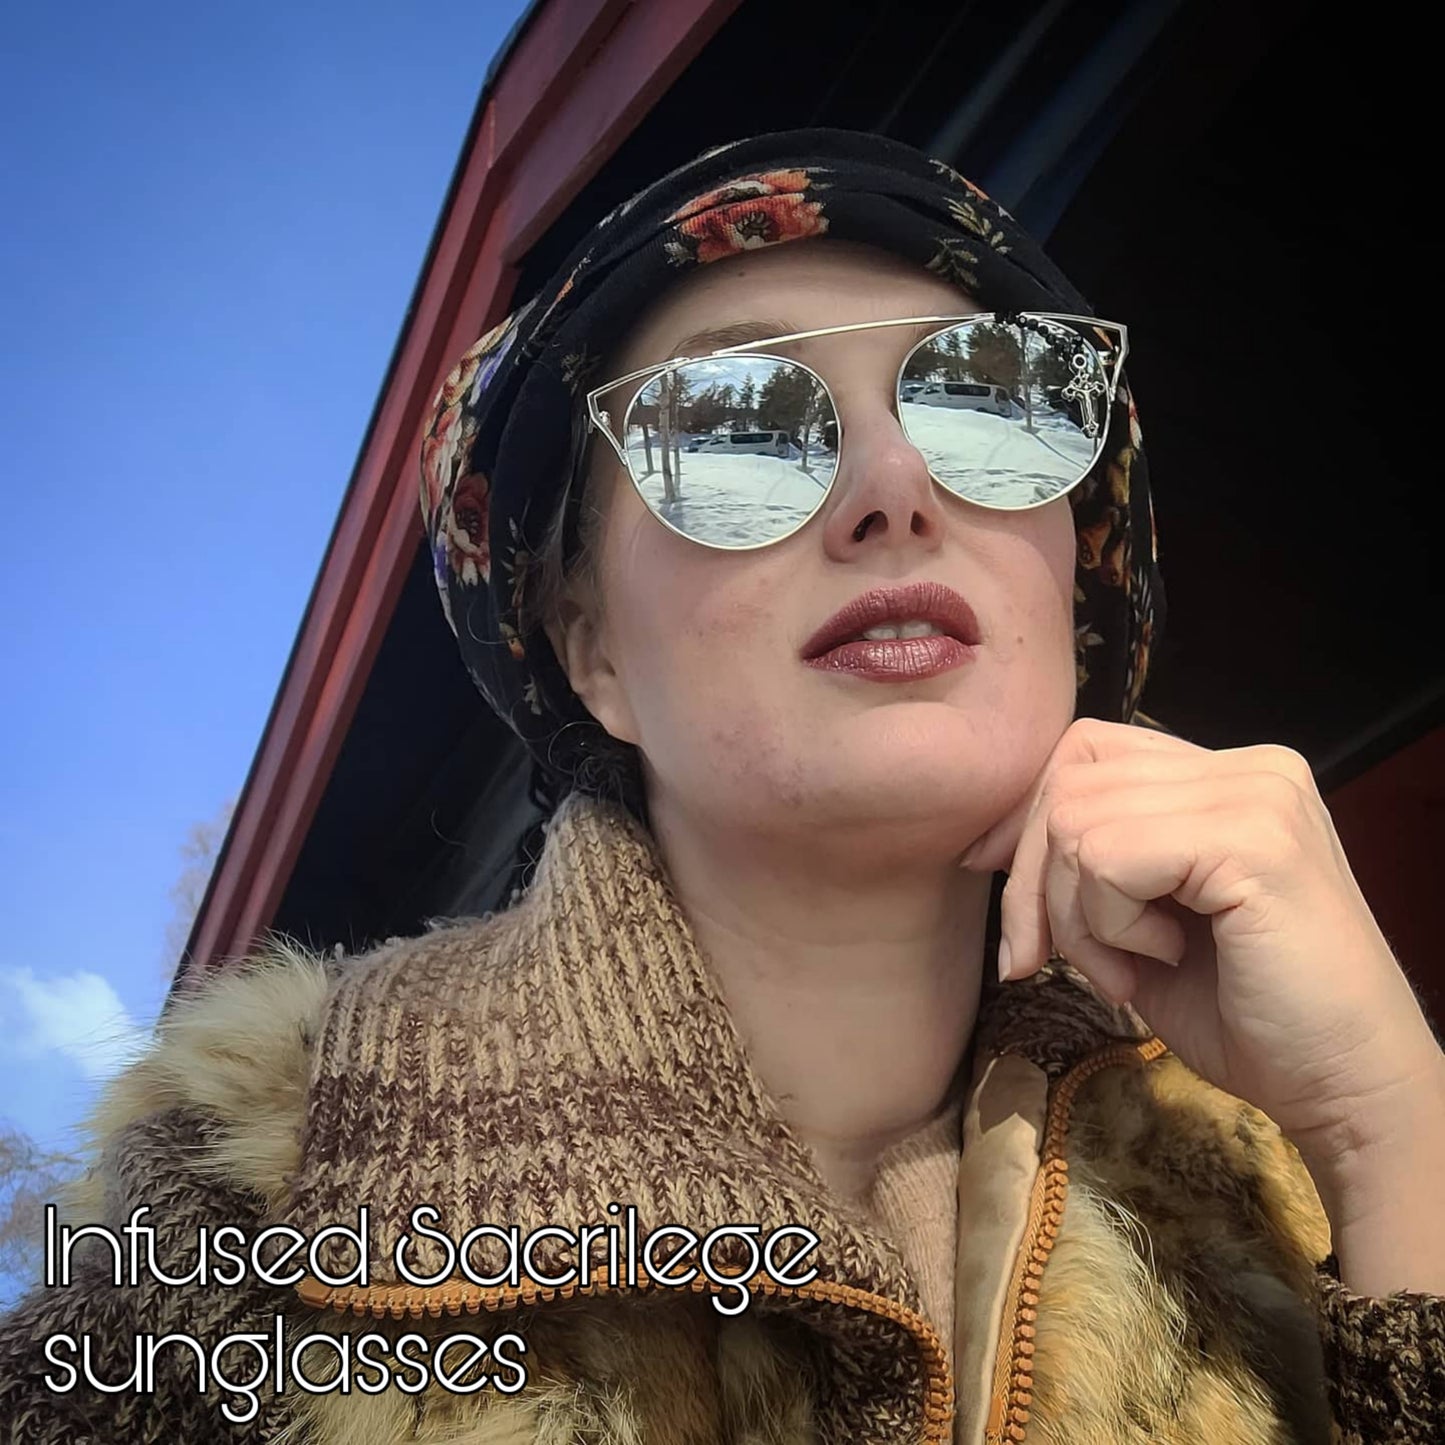 Sacrilegious collection: The Infused Sacrilege sunglasses, limited edition unisex model